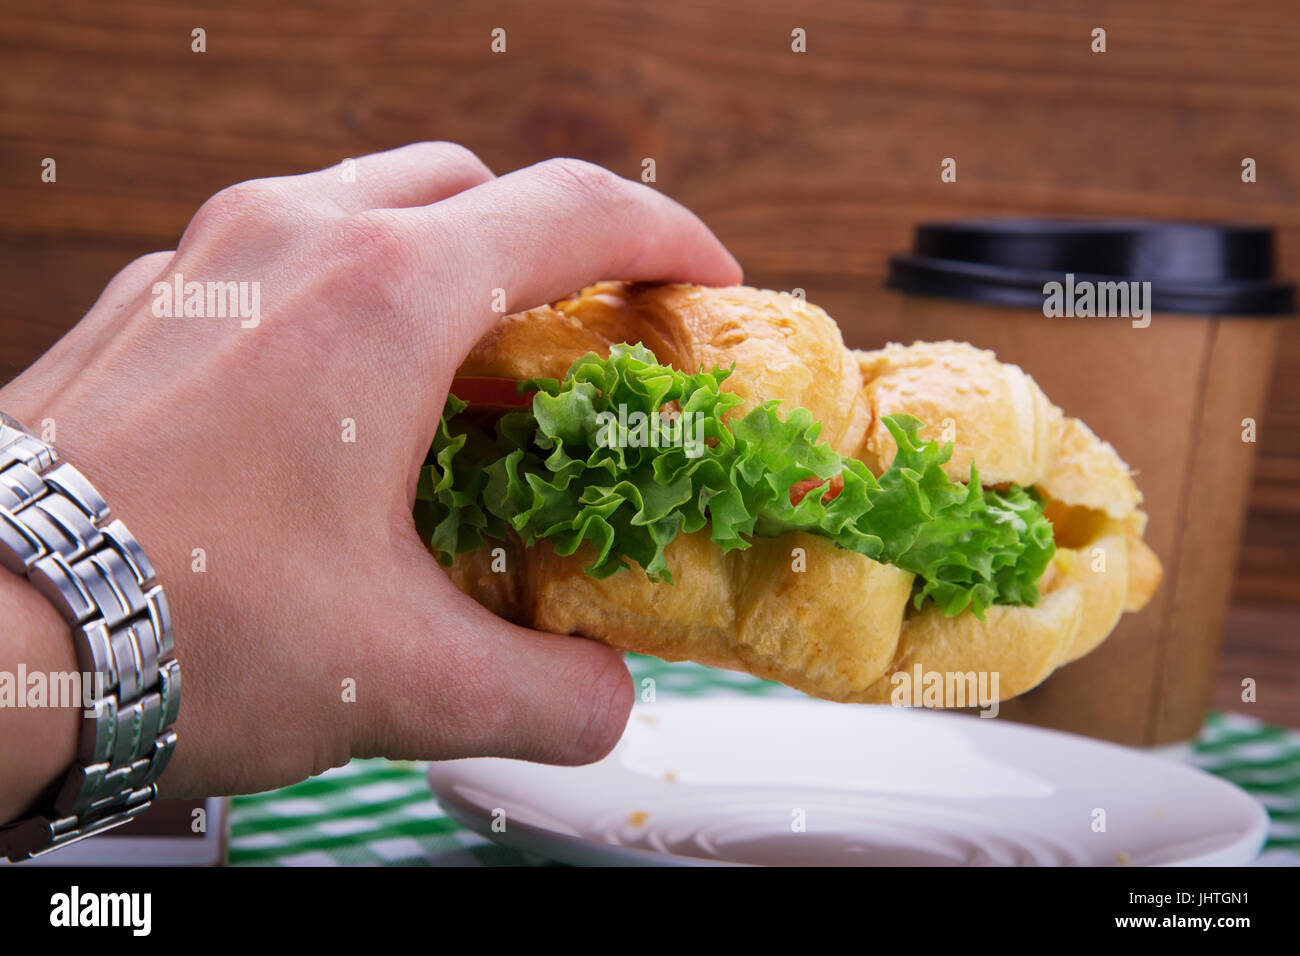 Croissant sandwich in hand. On the table coffee. Business lunch concept. Stock Photo